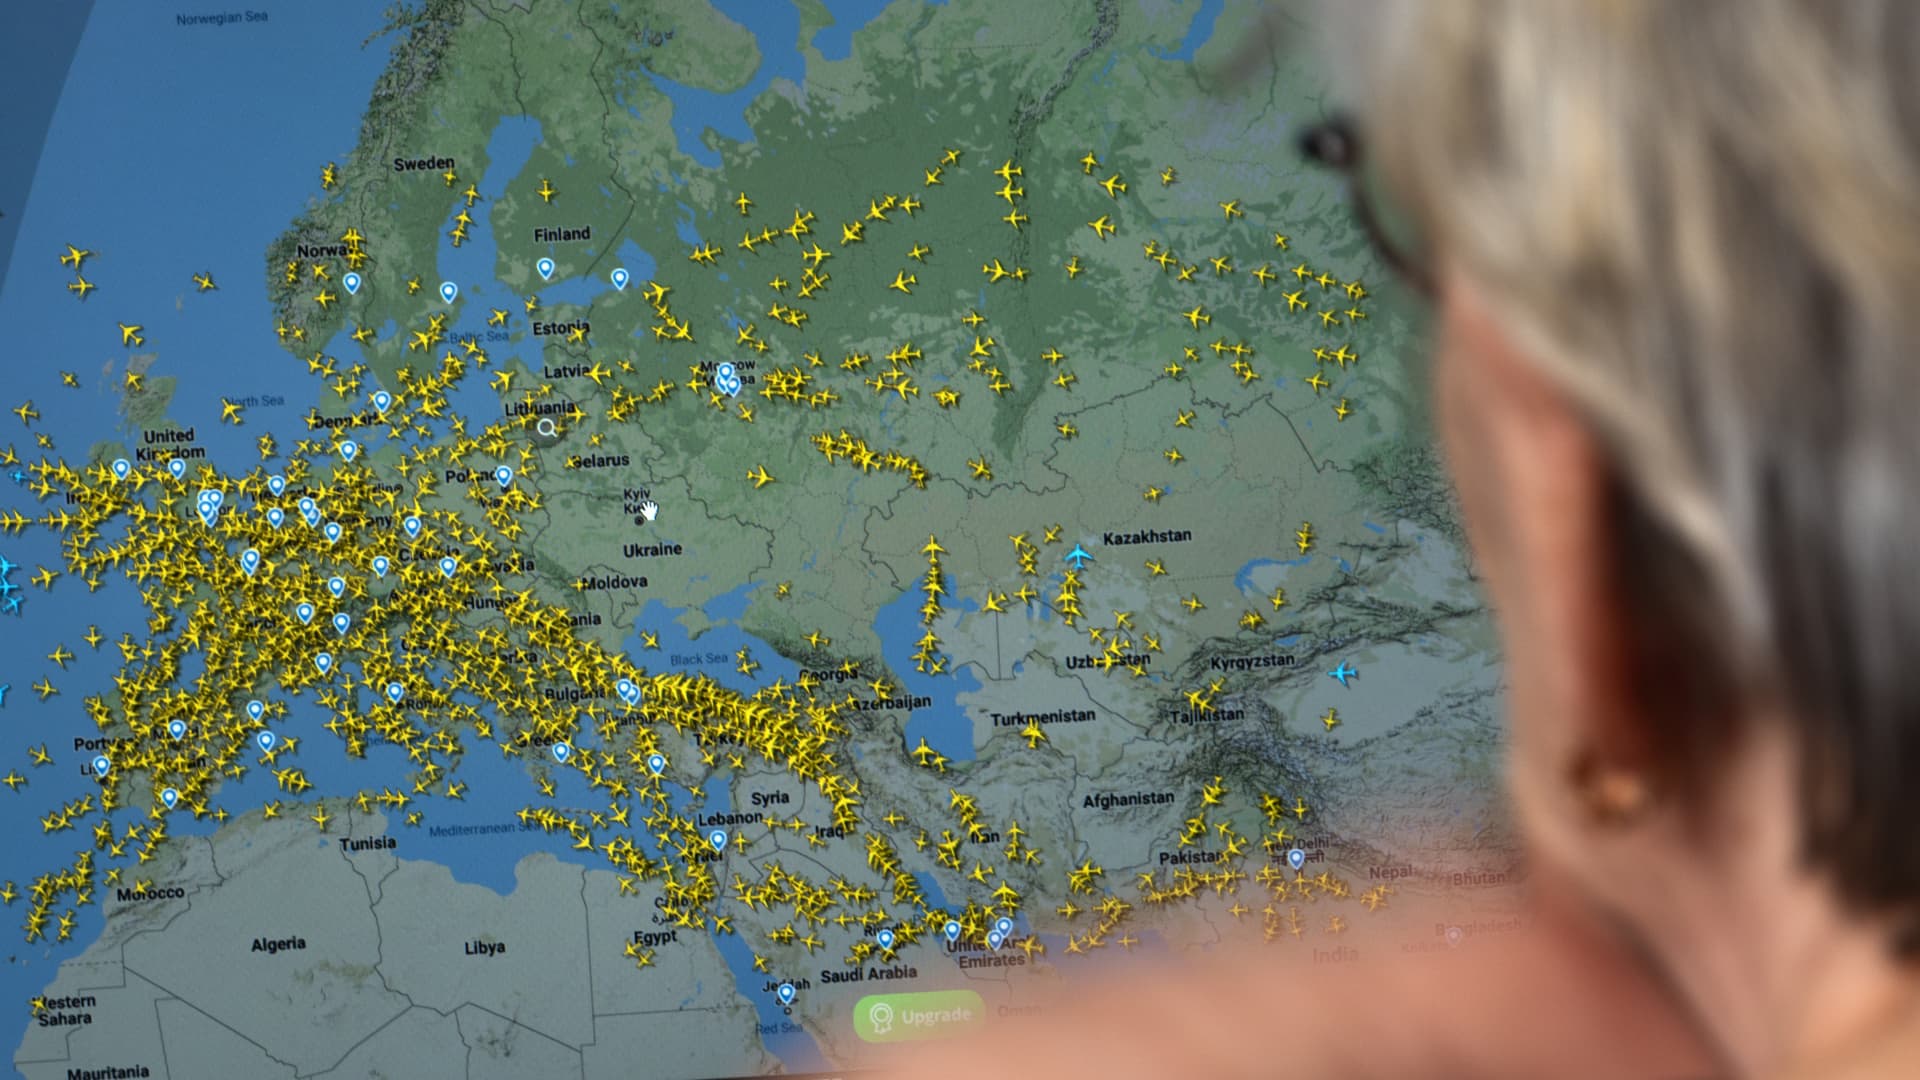 How the conflict is disrupting air travel